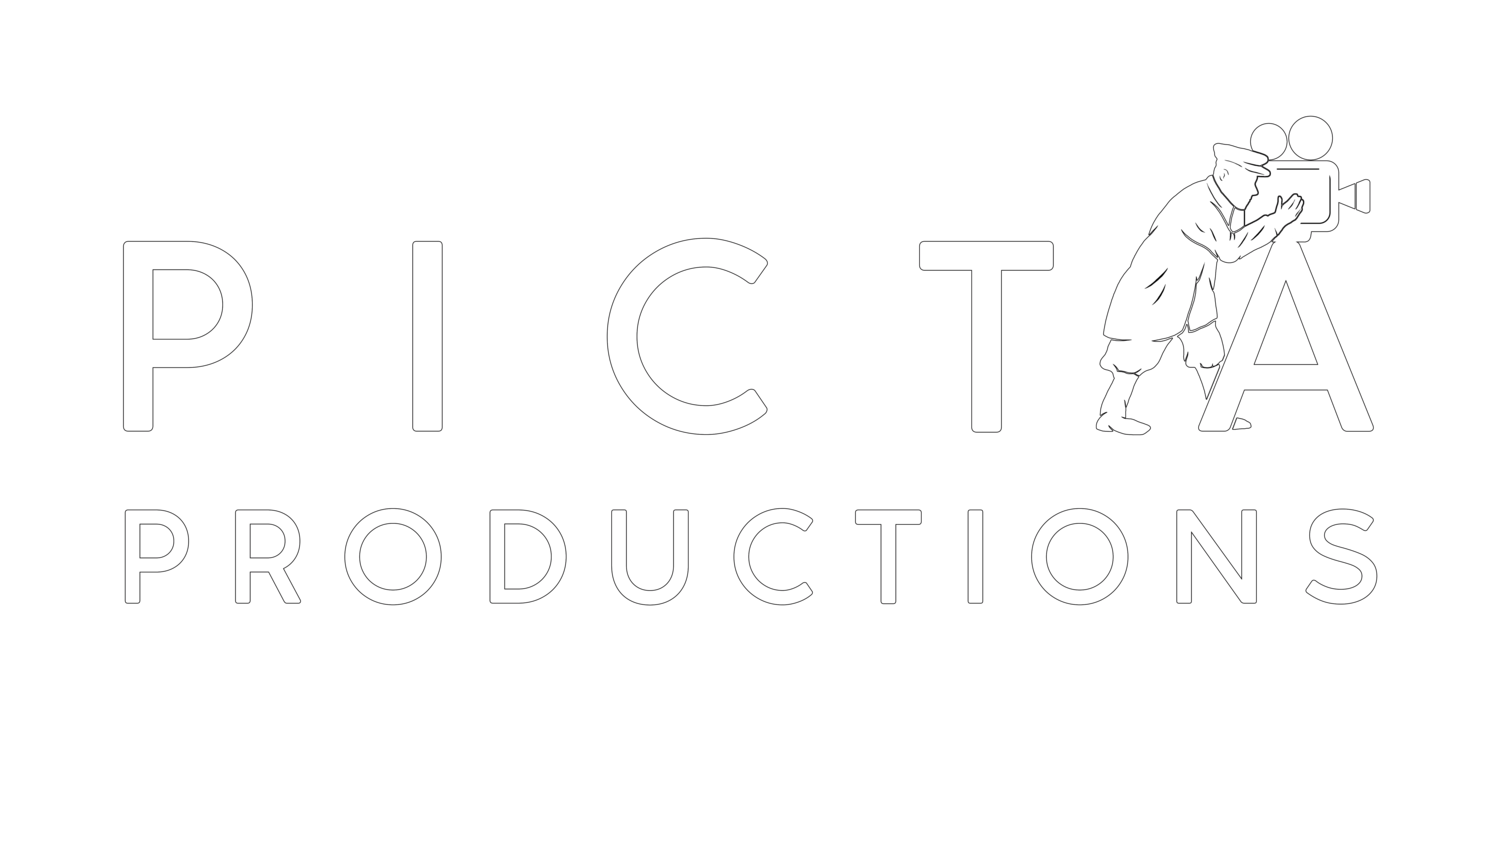 Picta Productions